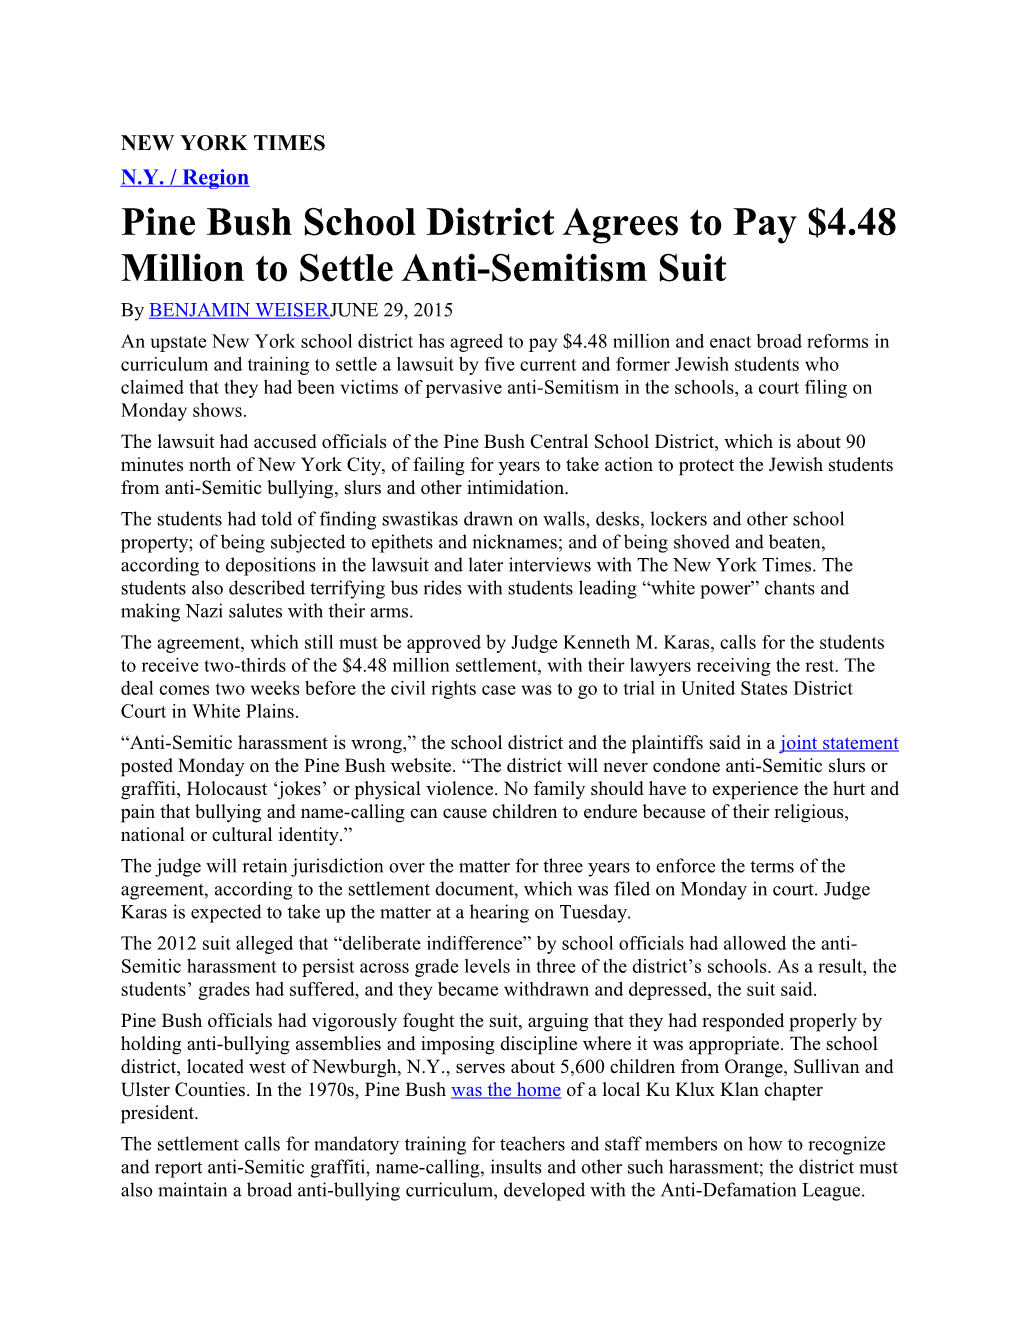 Pine Bush School District Agrees to Pay $4.48 Million to Settle Anti-Semitism Suit